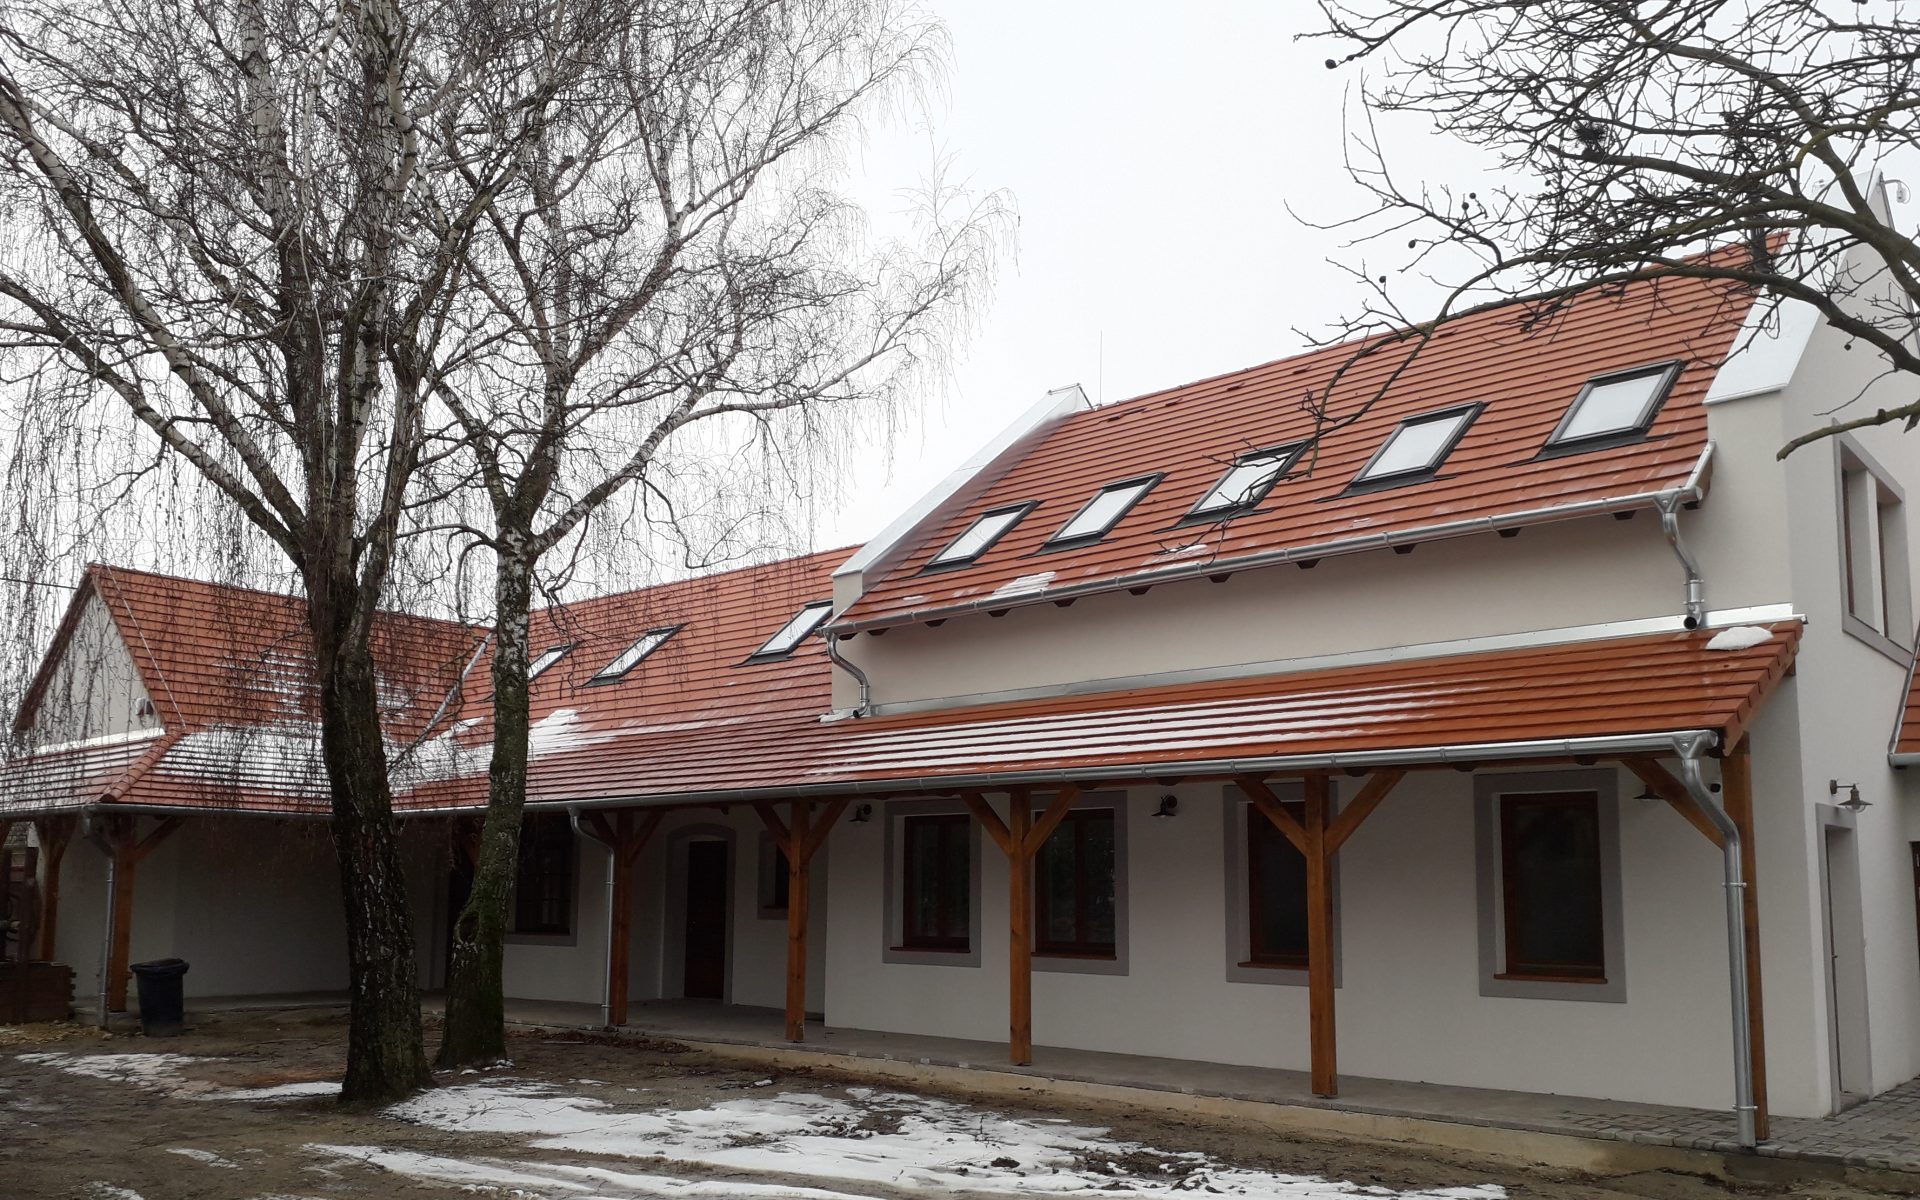 Handicraft house in Kiscsősz became a home of exhibitions, trainings and workshops